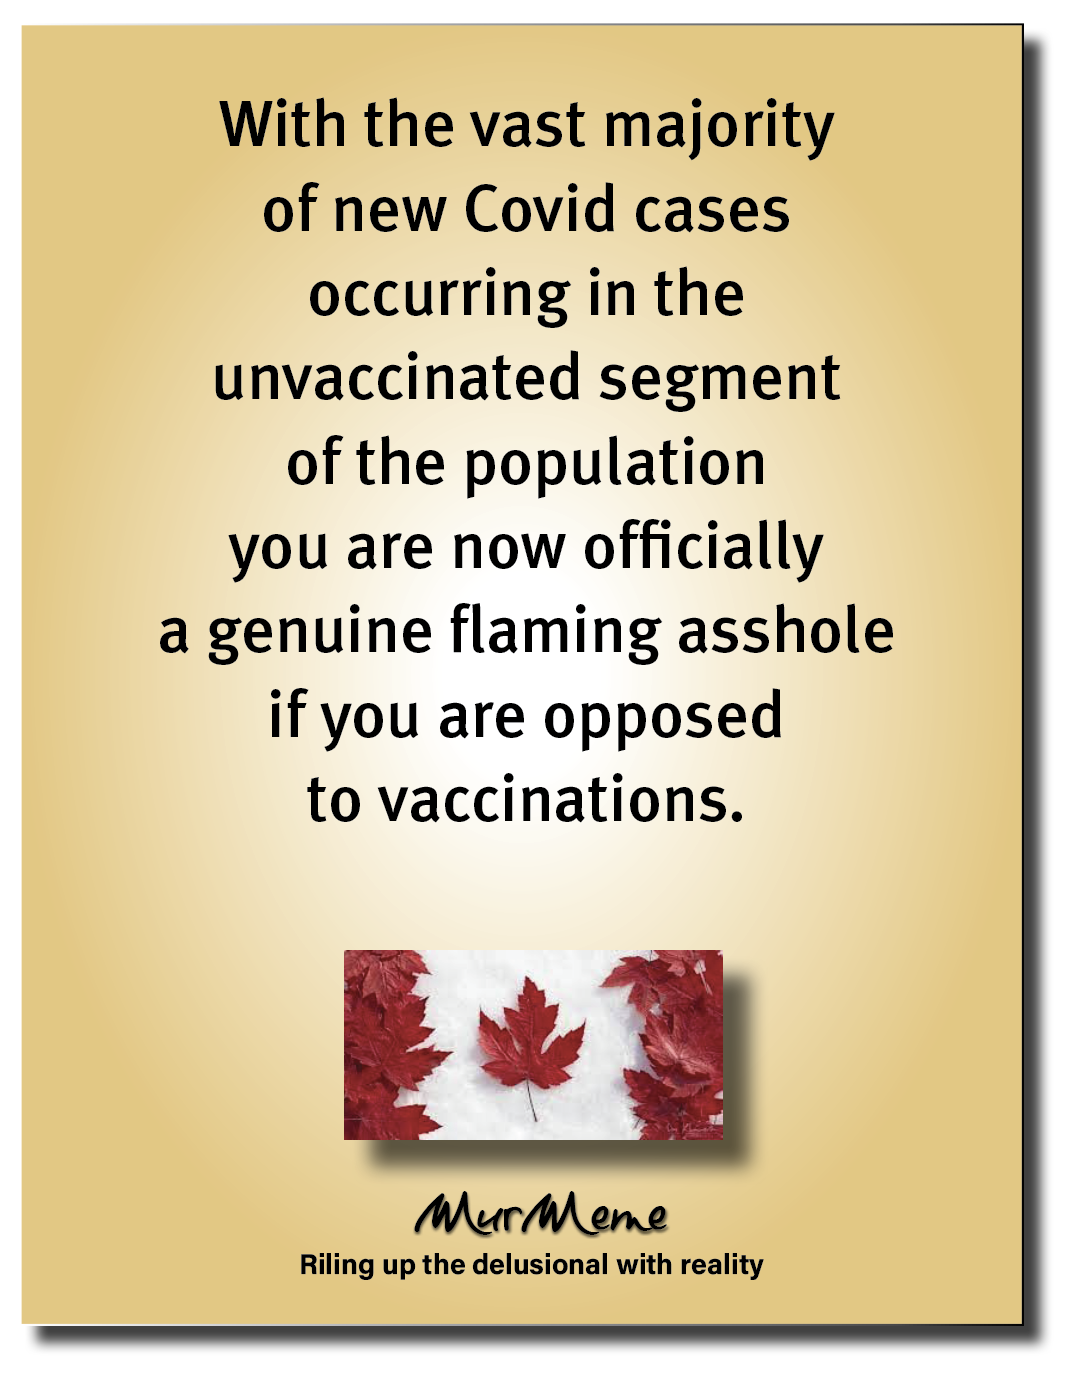 With the vast majority
of new Covid cases
occurring in the
unvaccinated segment
of the population
you are now officially
a genuine flaming asshole
if you are opposed
to vaccinations.

£3

Mur
Riling up the delusional with reality